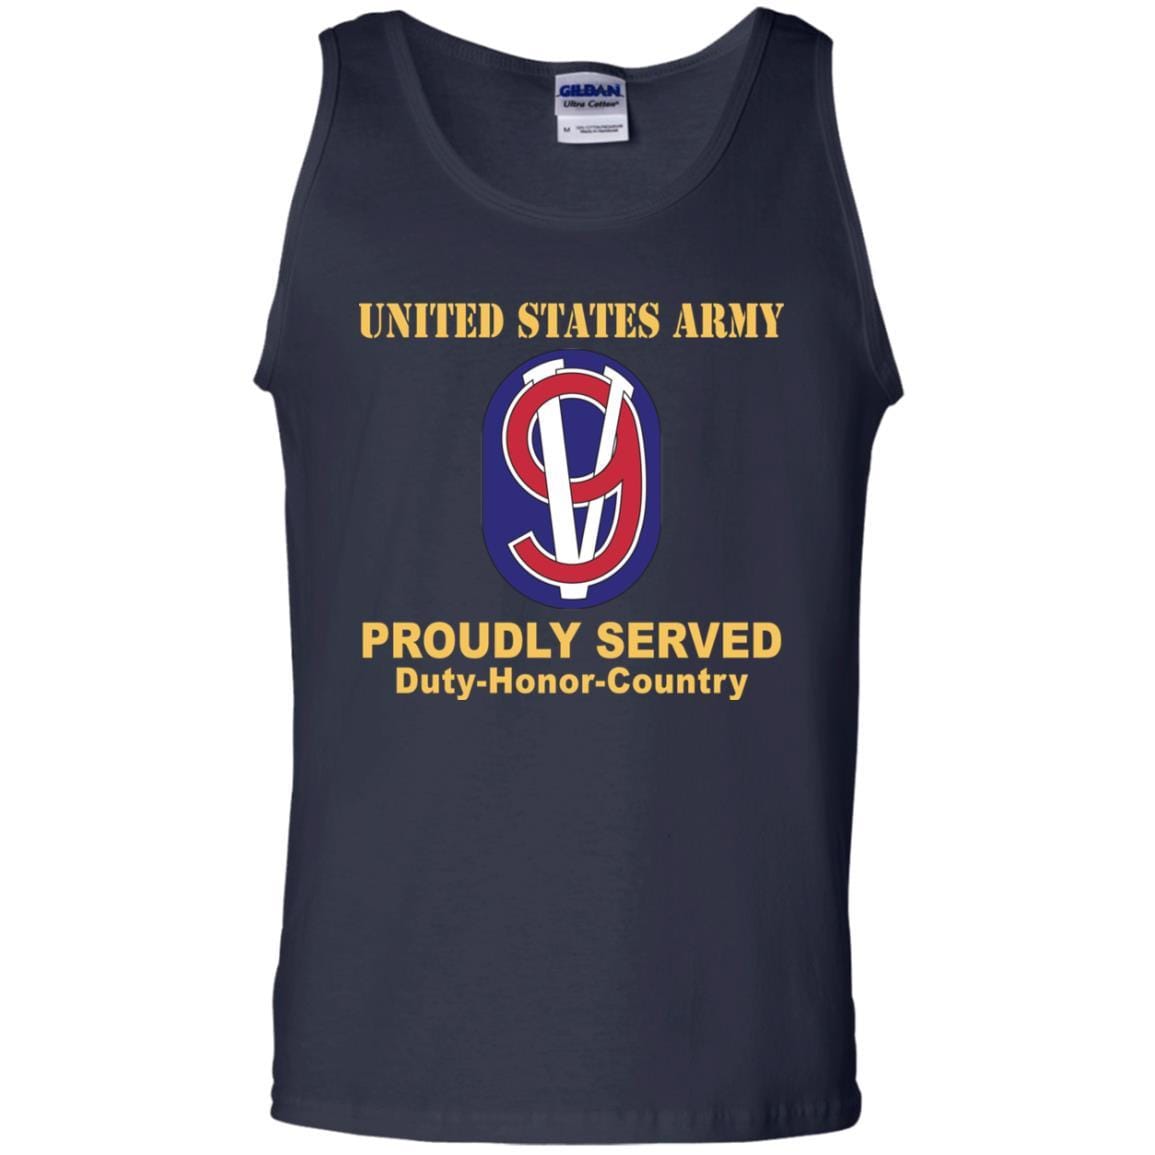 US ARMY 95 TRAINING DIVISION USAR - Proudly Served T-Shirt On Front For Men-TShirt-Army-Veterans Nation